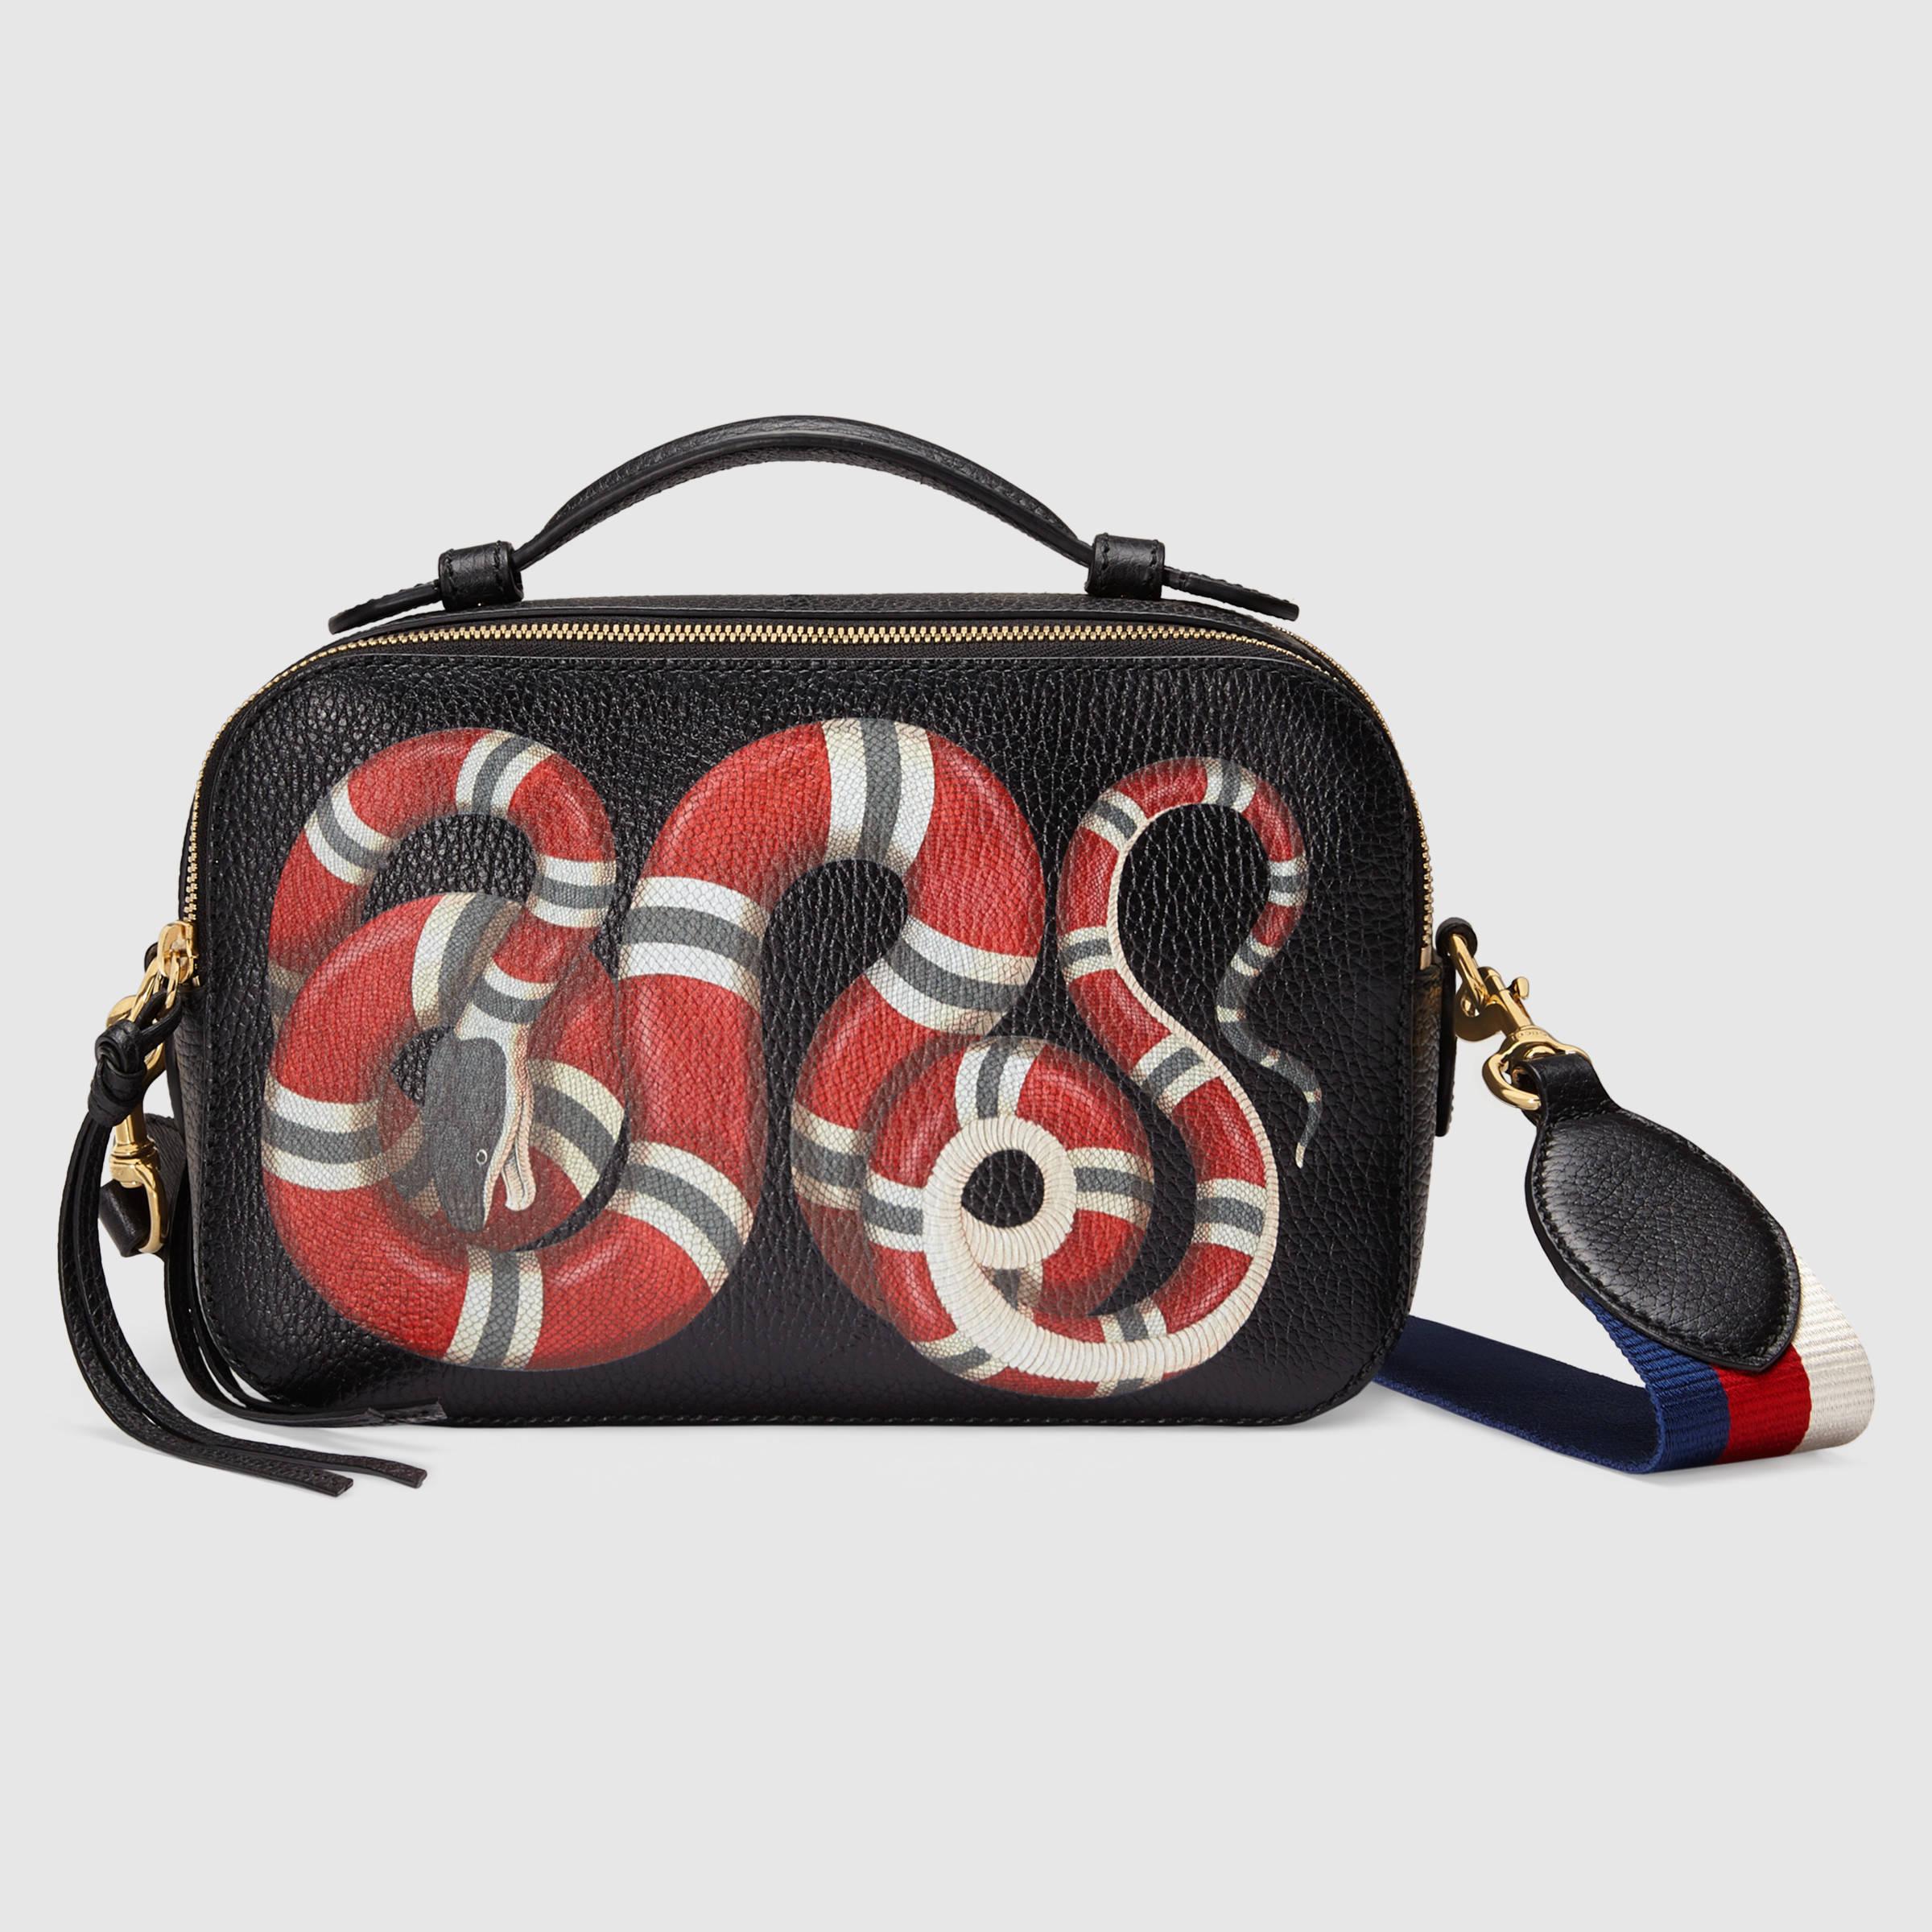 Gucci Snake Print Leather Top Handle Bag - Lyst